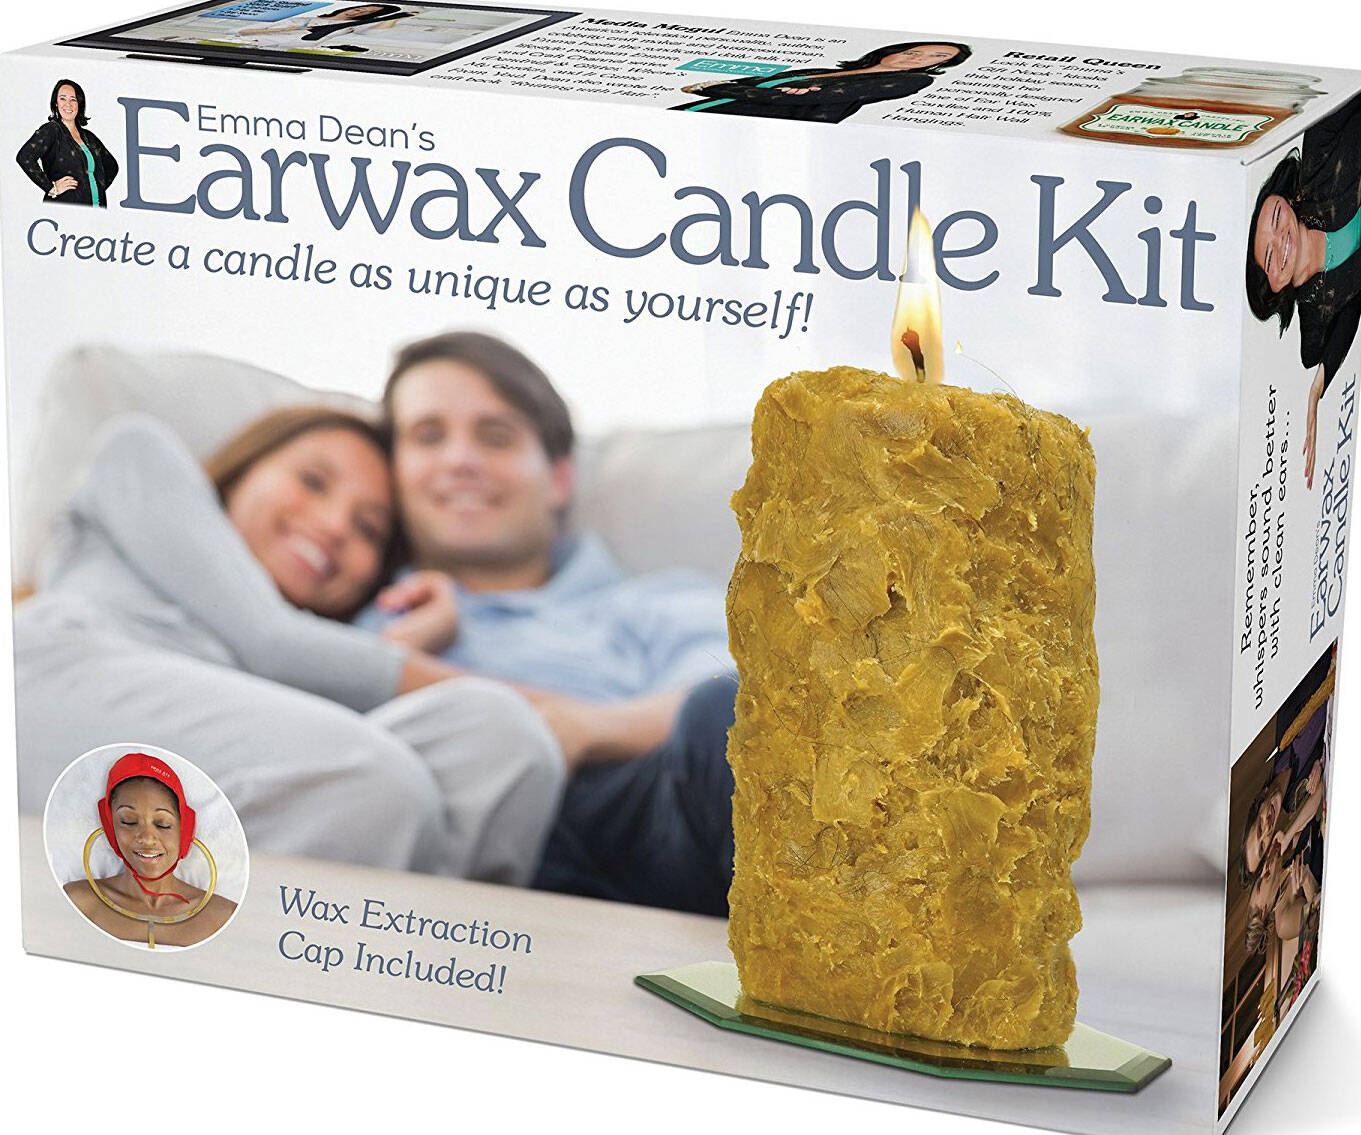 Earwax Candle Kit - //coolthings.us